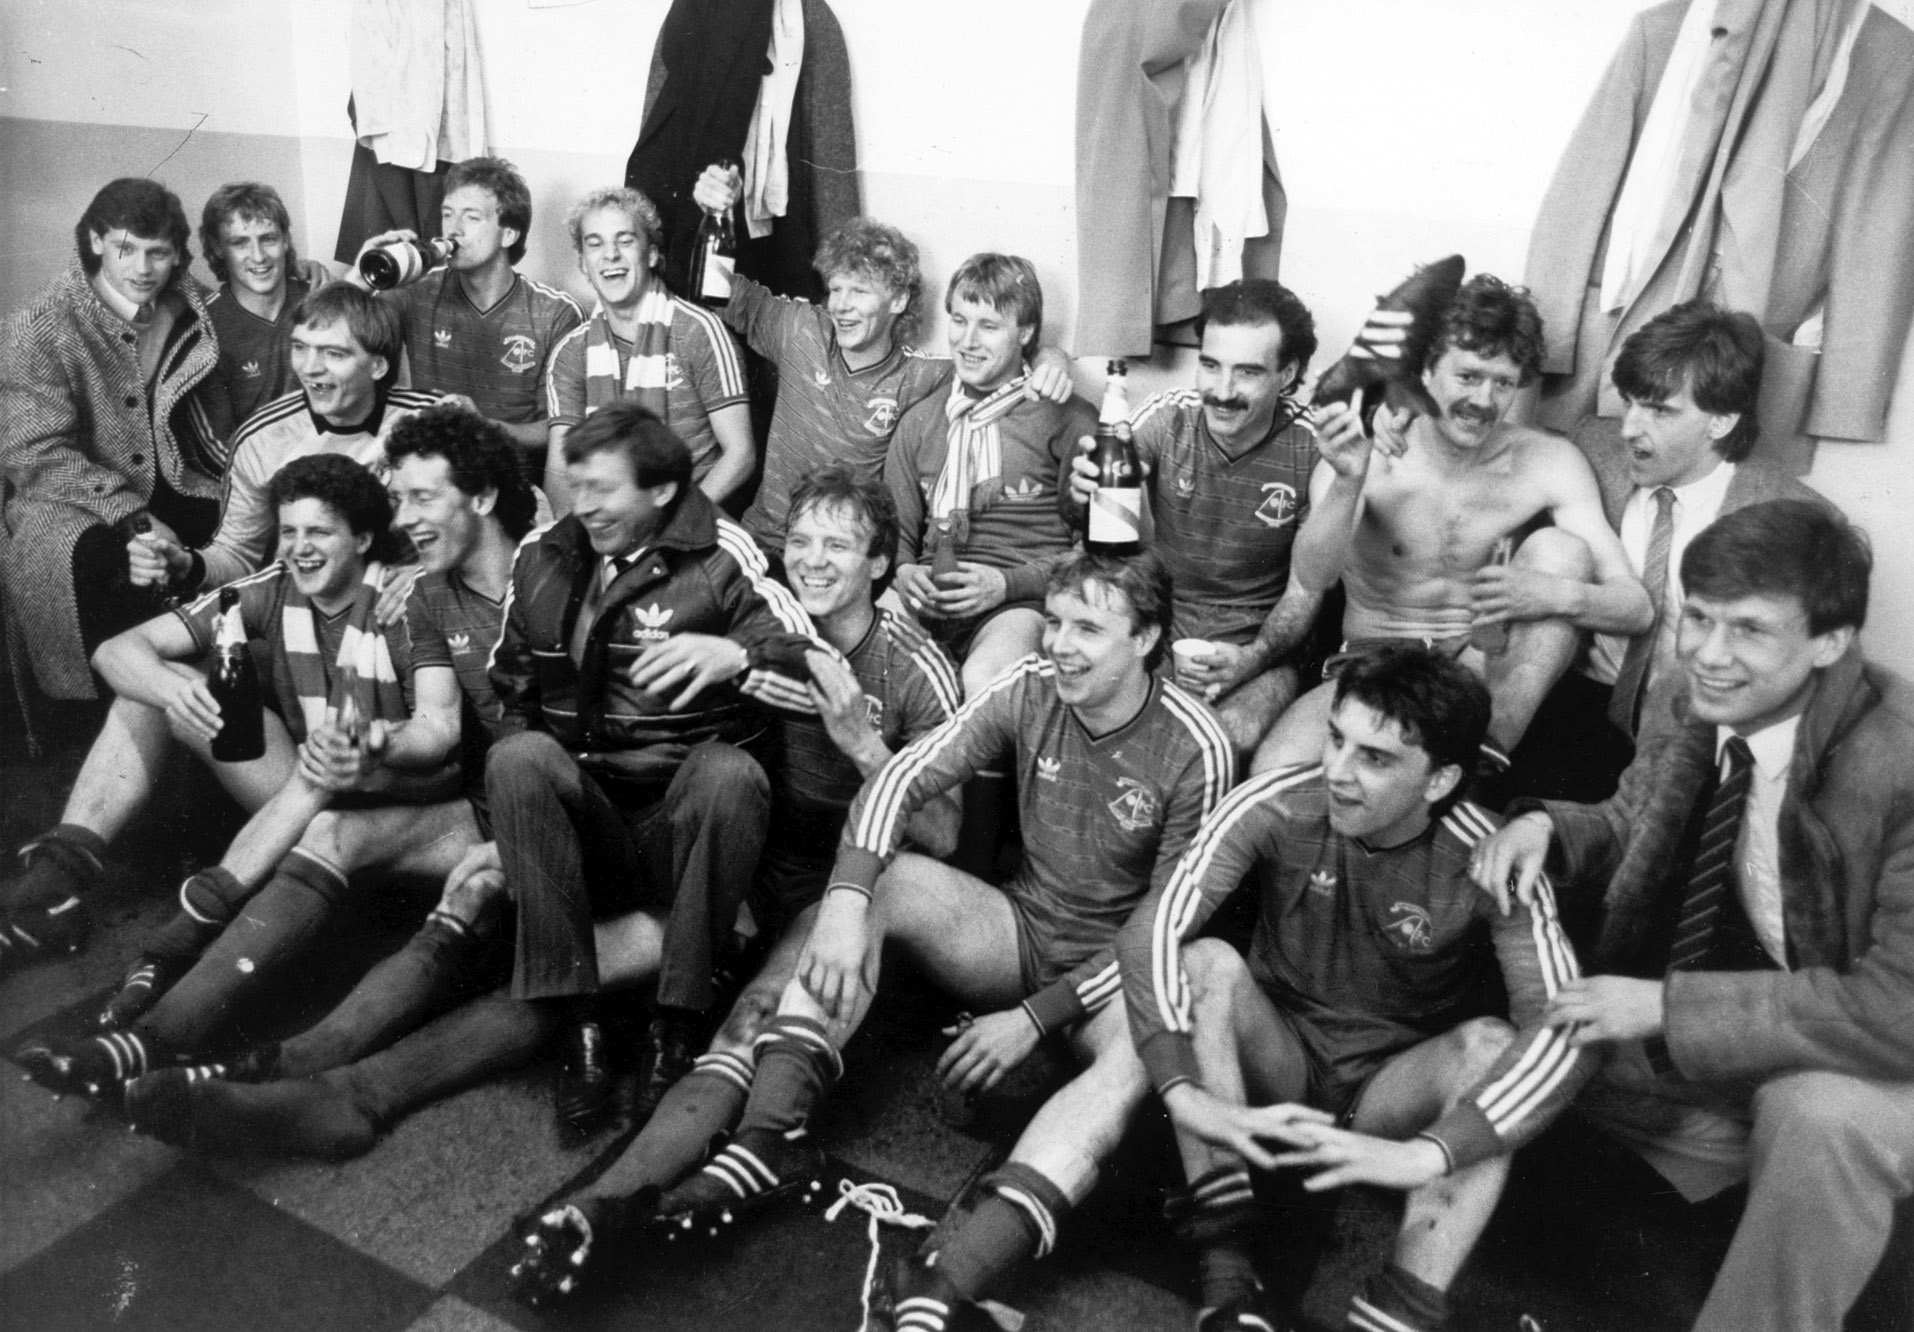 The Aberdeen team toast the taking of the 1984-85 season Premier League title.